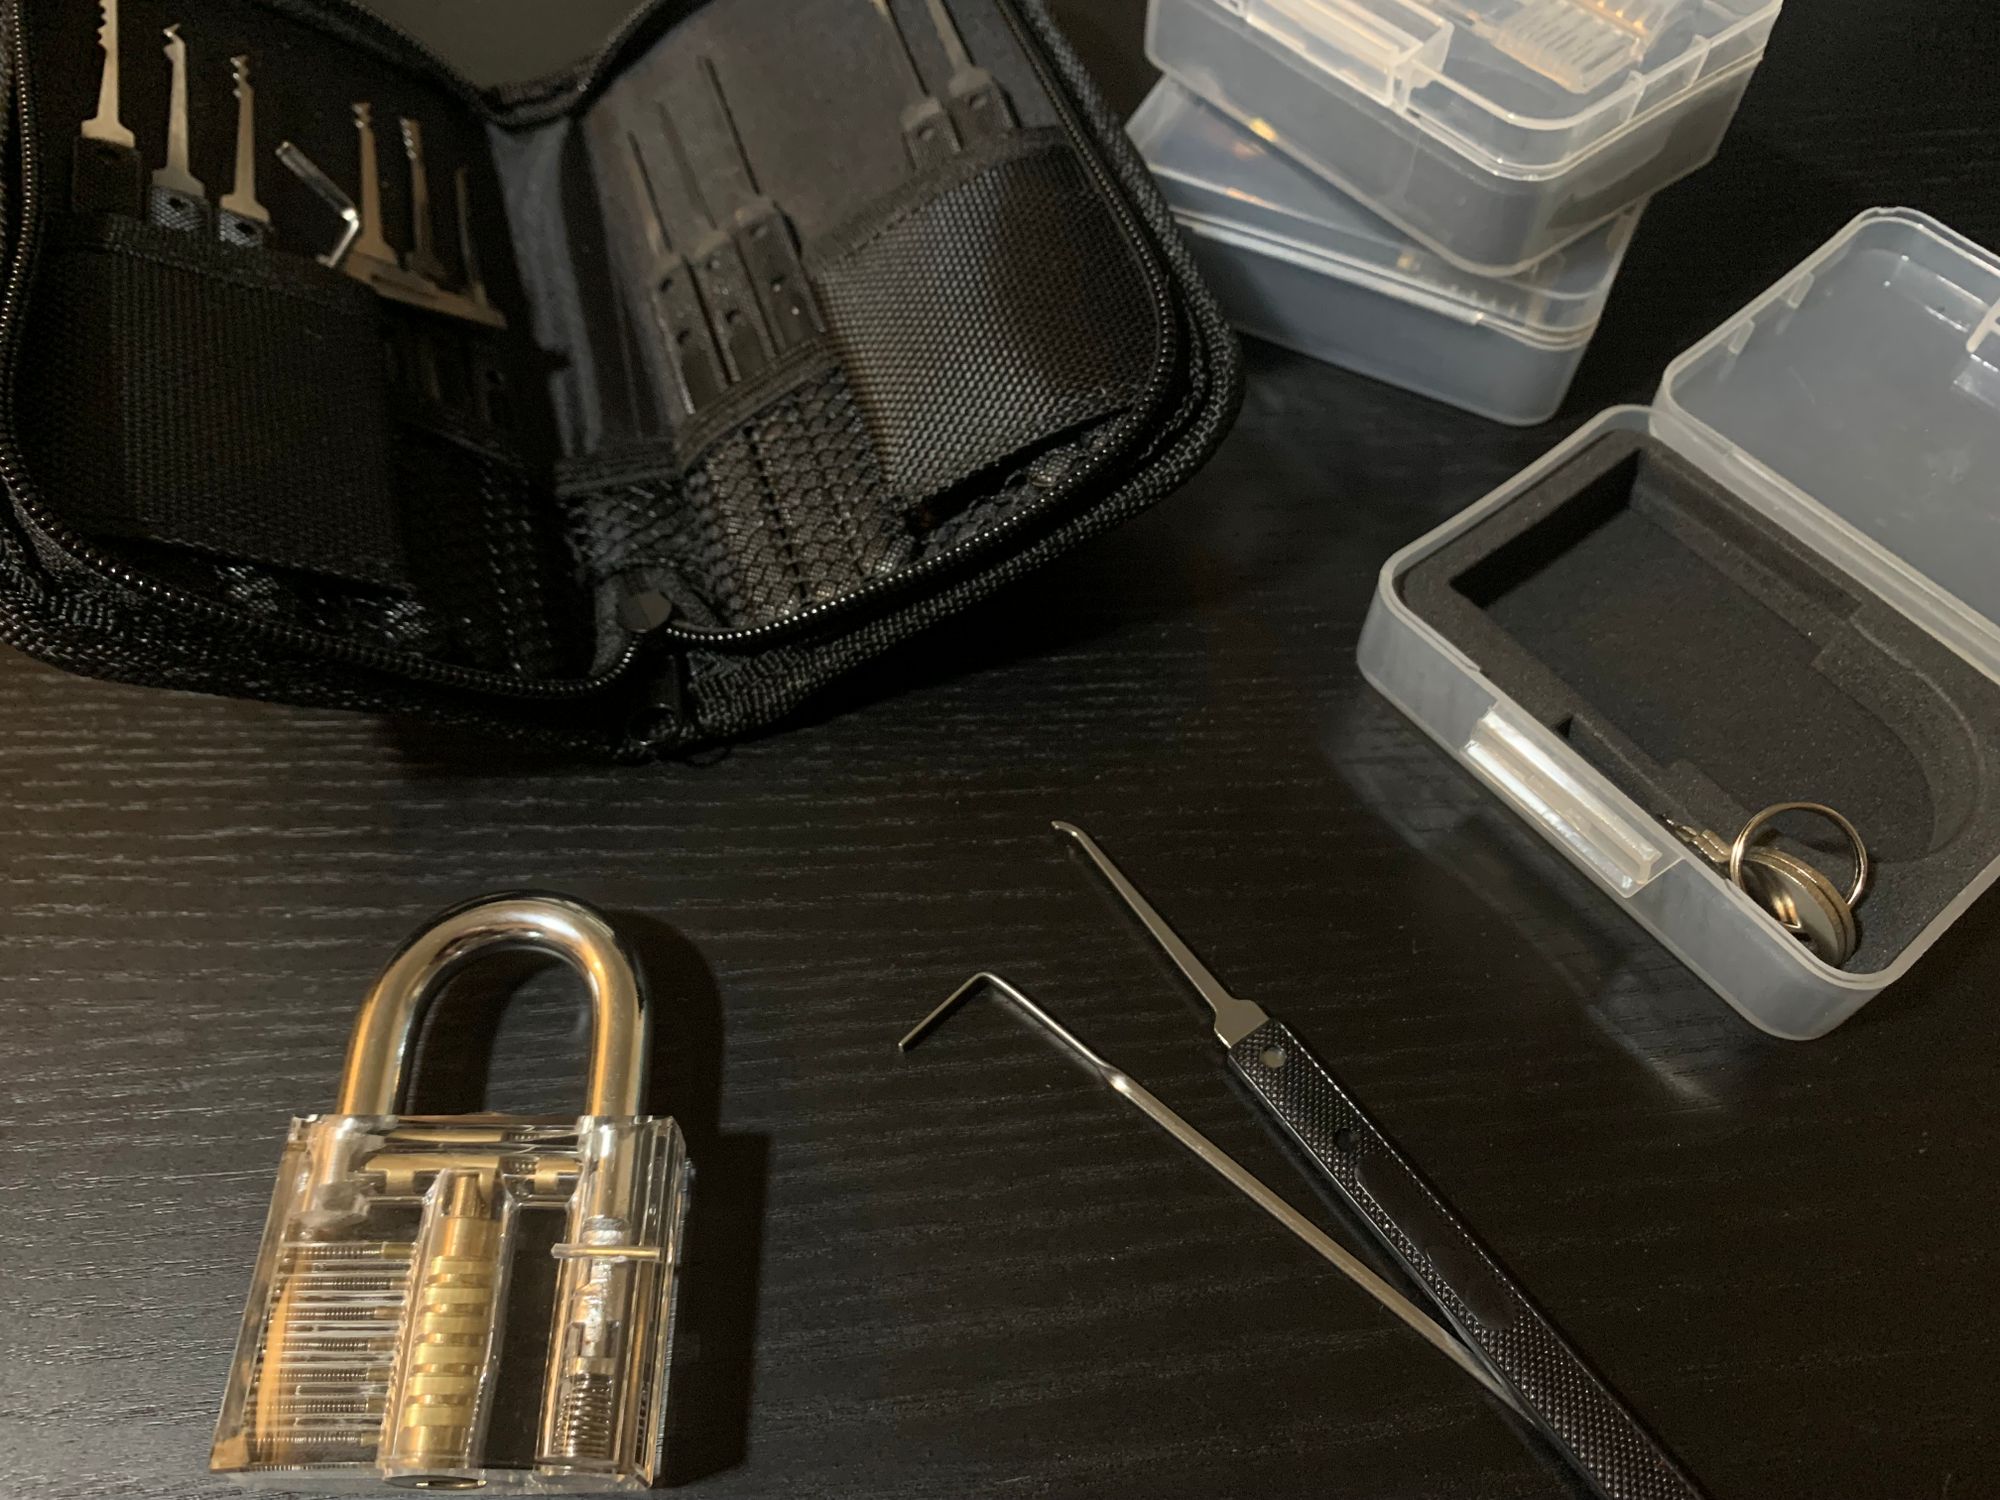 A photograph of a set of pin-tumbler lockpicks next to a transparent acrylic practice lock on a table.